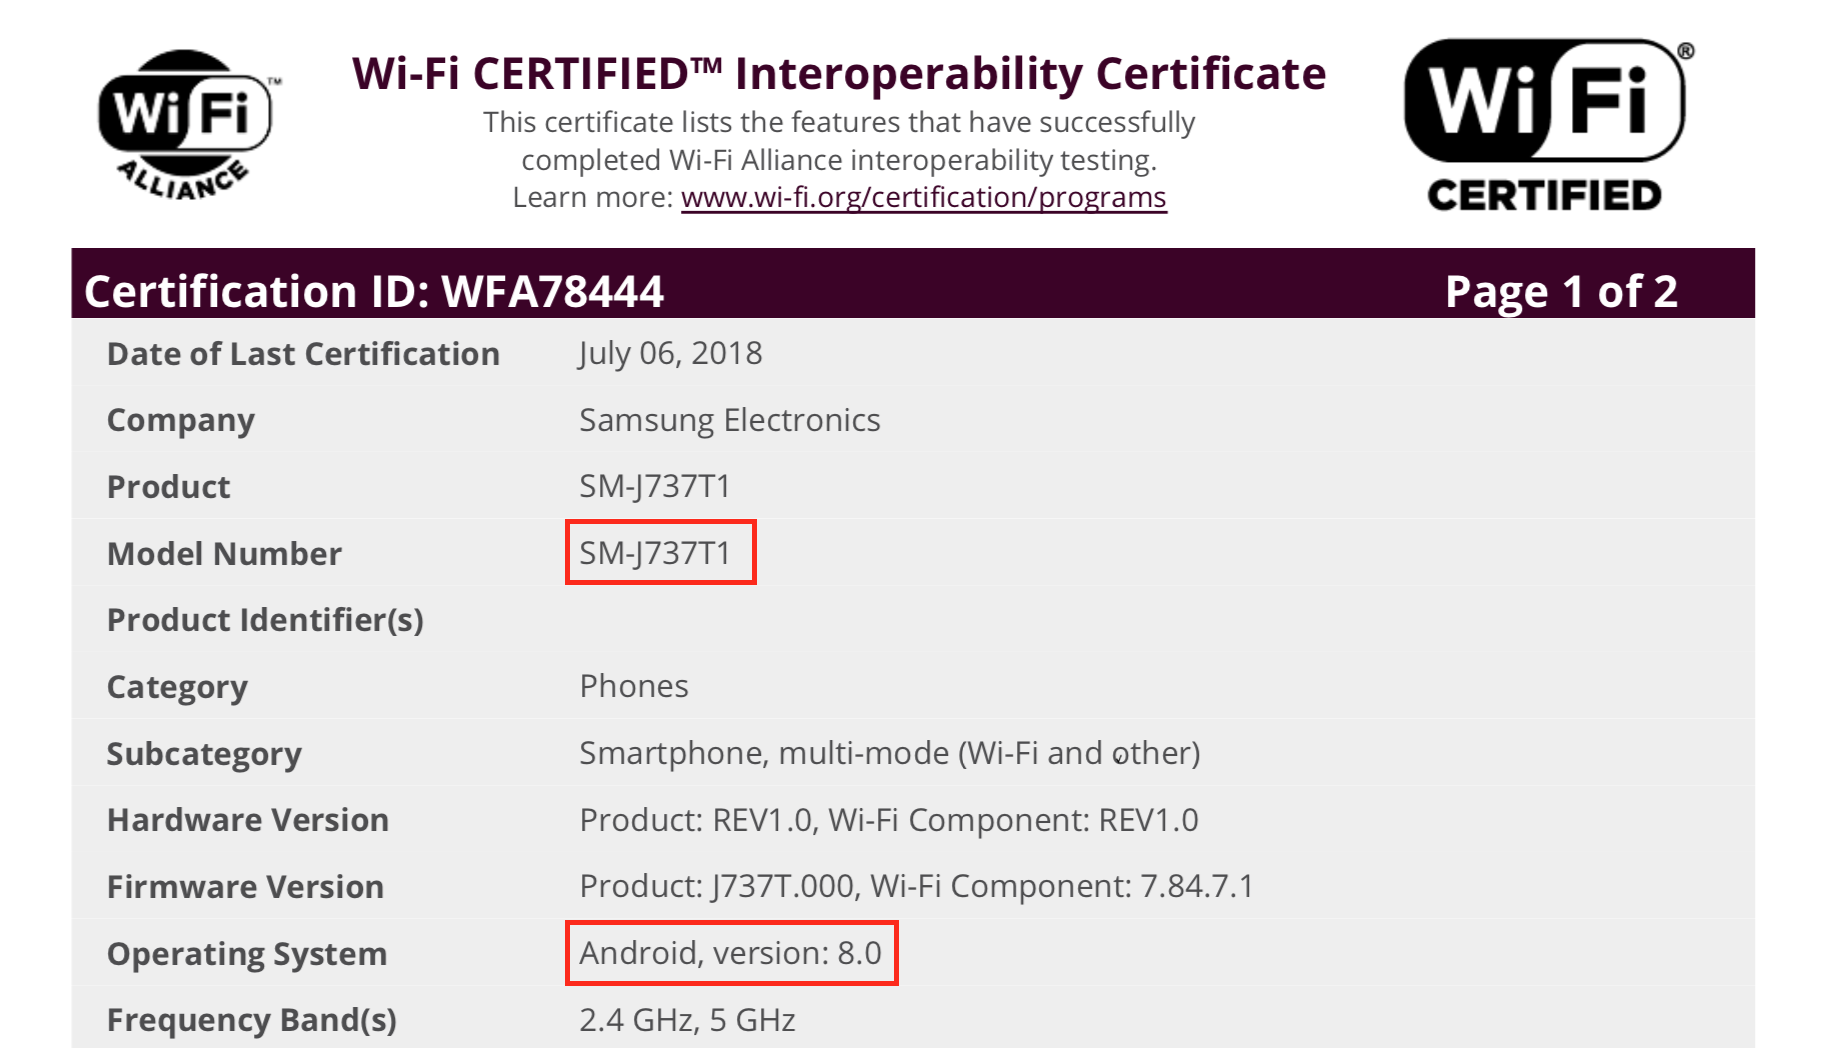 The mystery Galaxy phone received its Wi-Fi certification - Mystery Samsung Galaxy phone spotted passing through the Wi-Fi Alliance